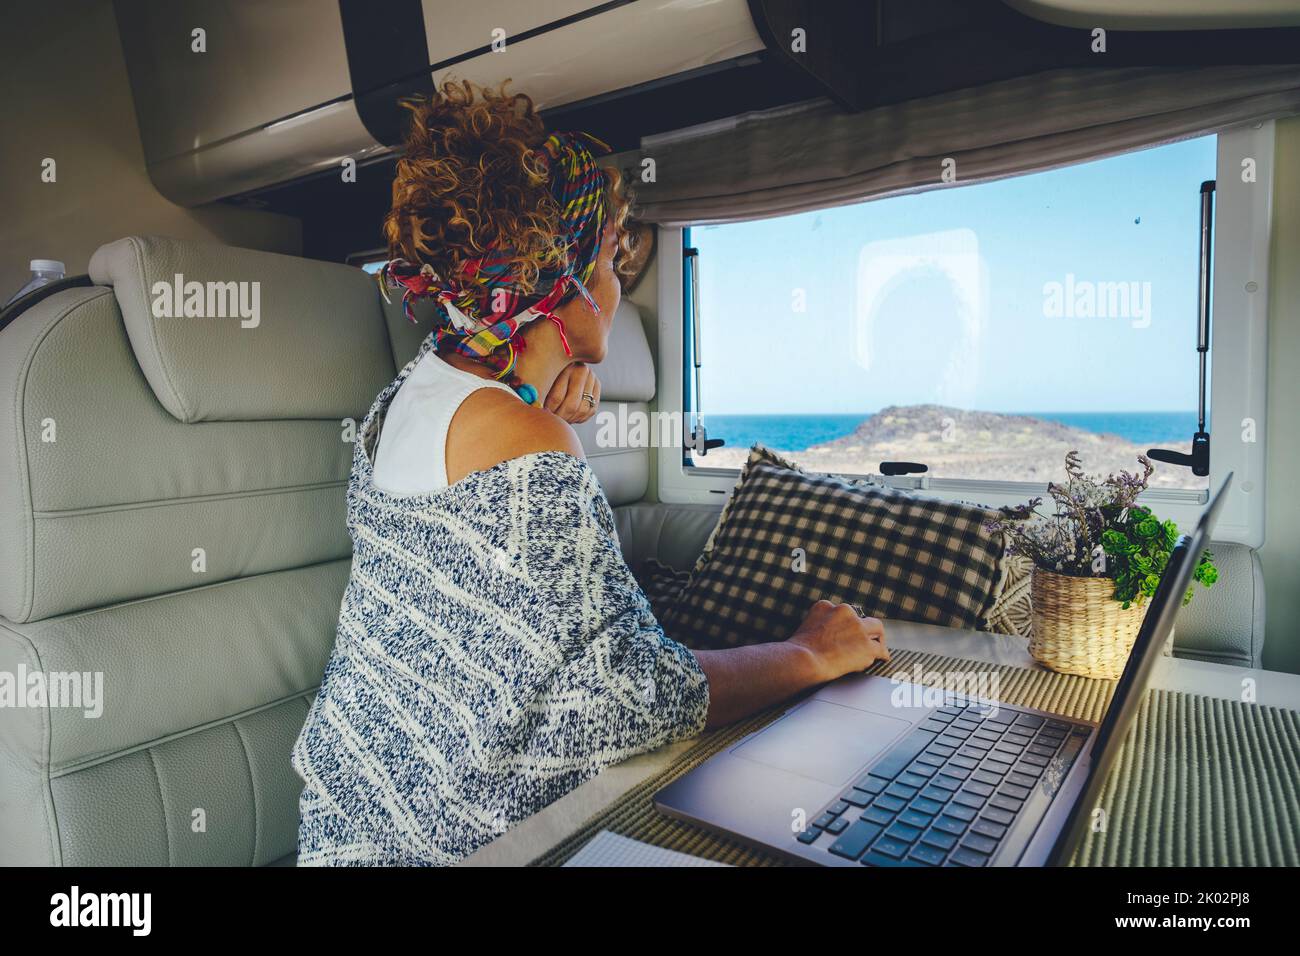 People in work and travel online modern activity business lifestyle. Woman looking outside from camper van interior sitting at the table with laptop computer. Concept of digital nomad life Stock Photo